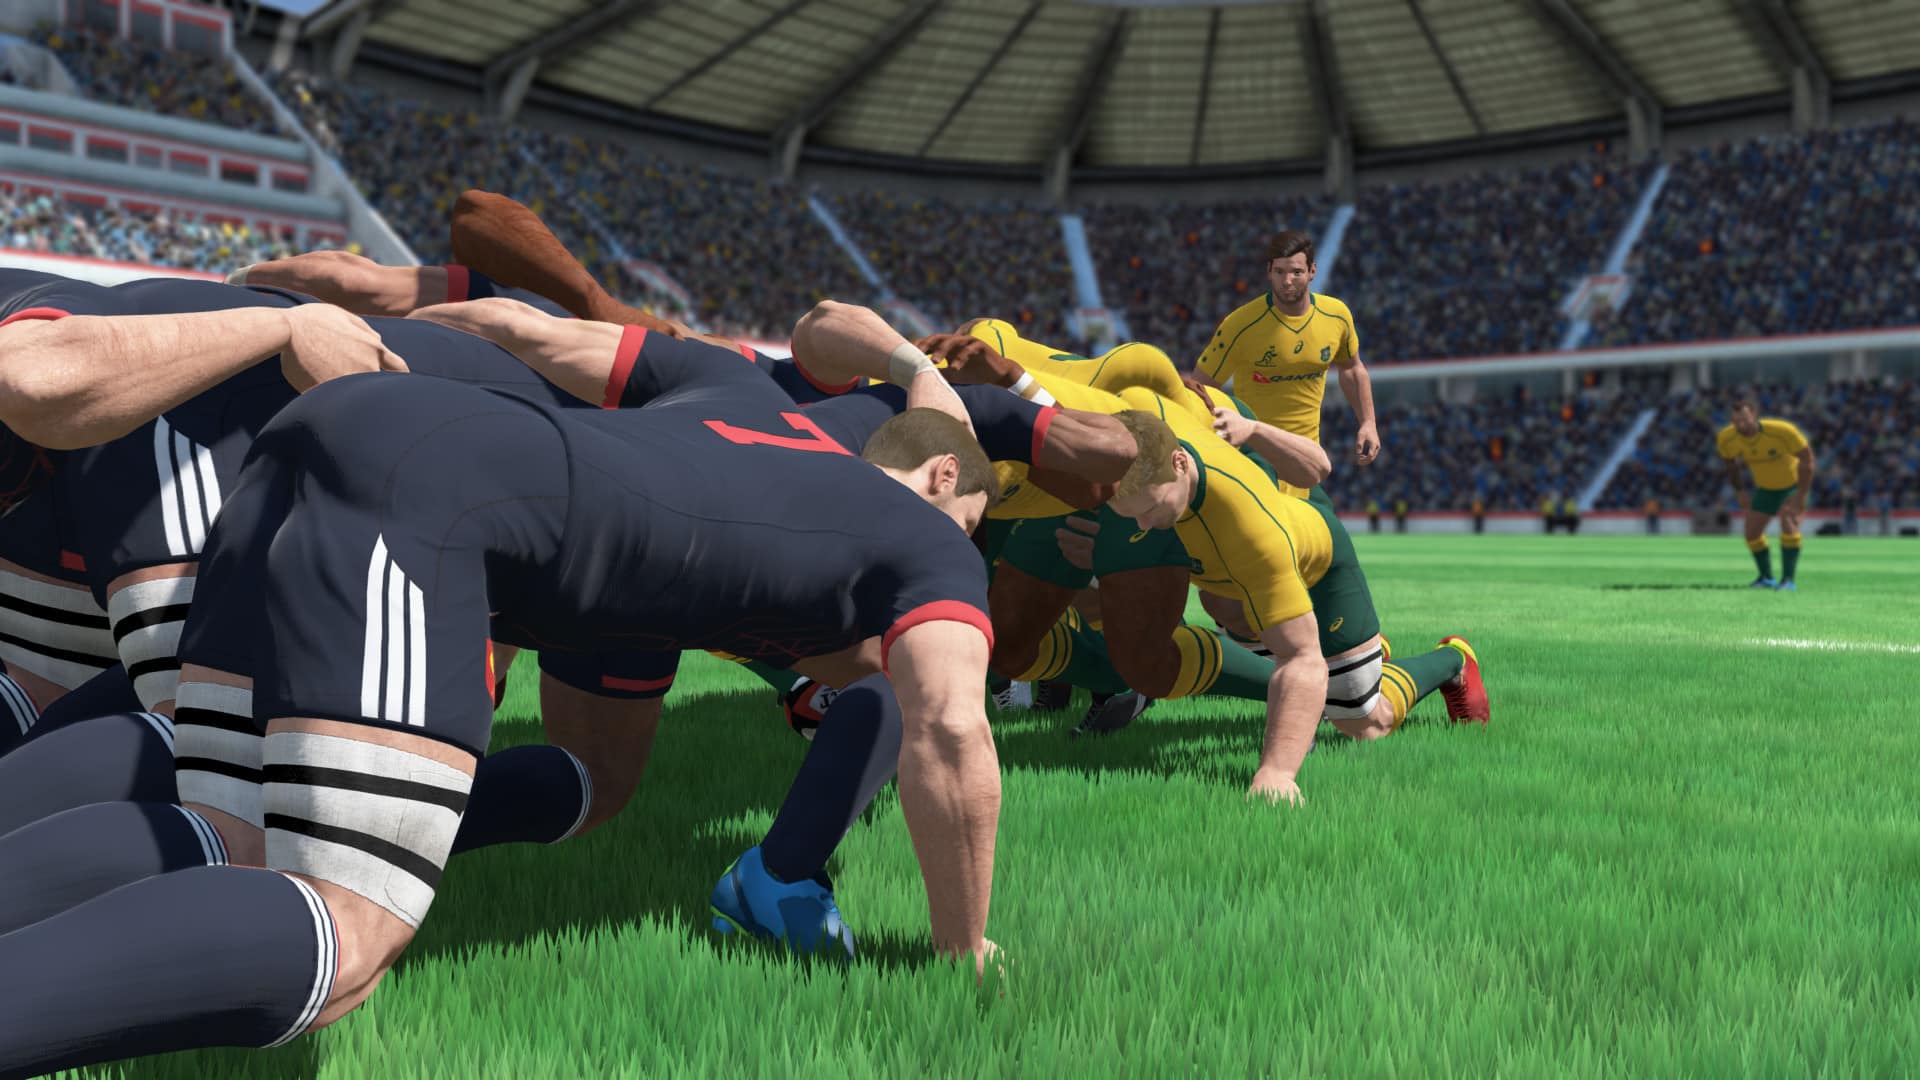 rugby 18 xbox one